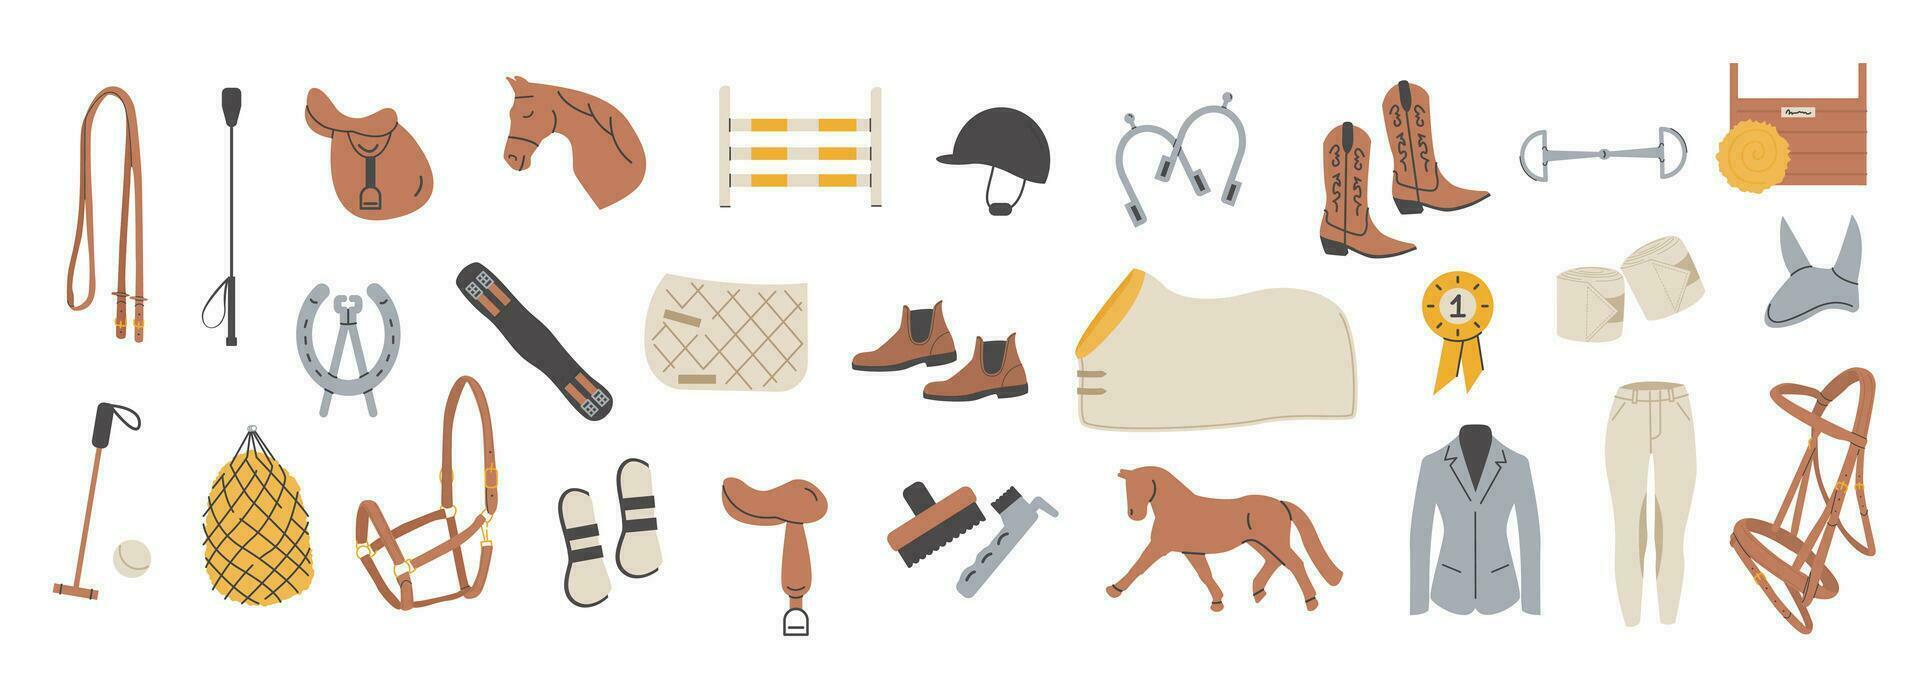 Horse riding colored flat icons vector set. Equestrian equipment illustrations in trendy modern hand drawn style. Equine sports signs. Dressage, show jumps elements. Horse stable tack.